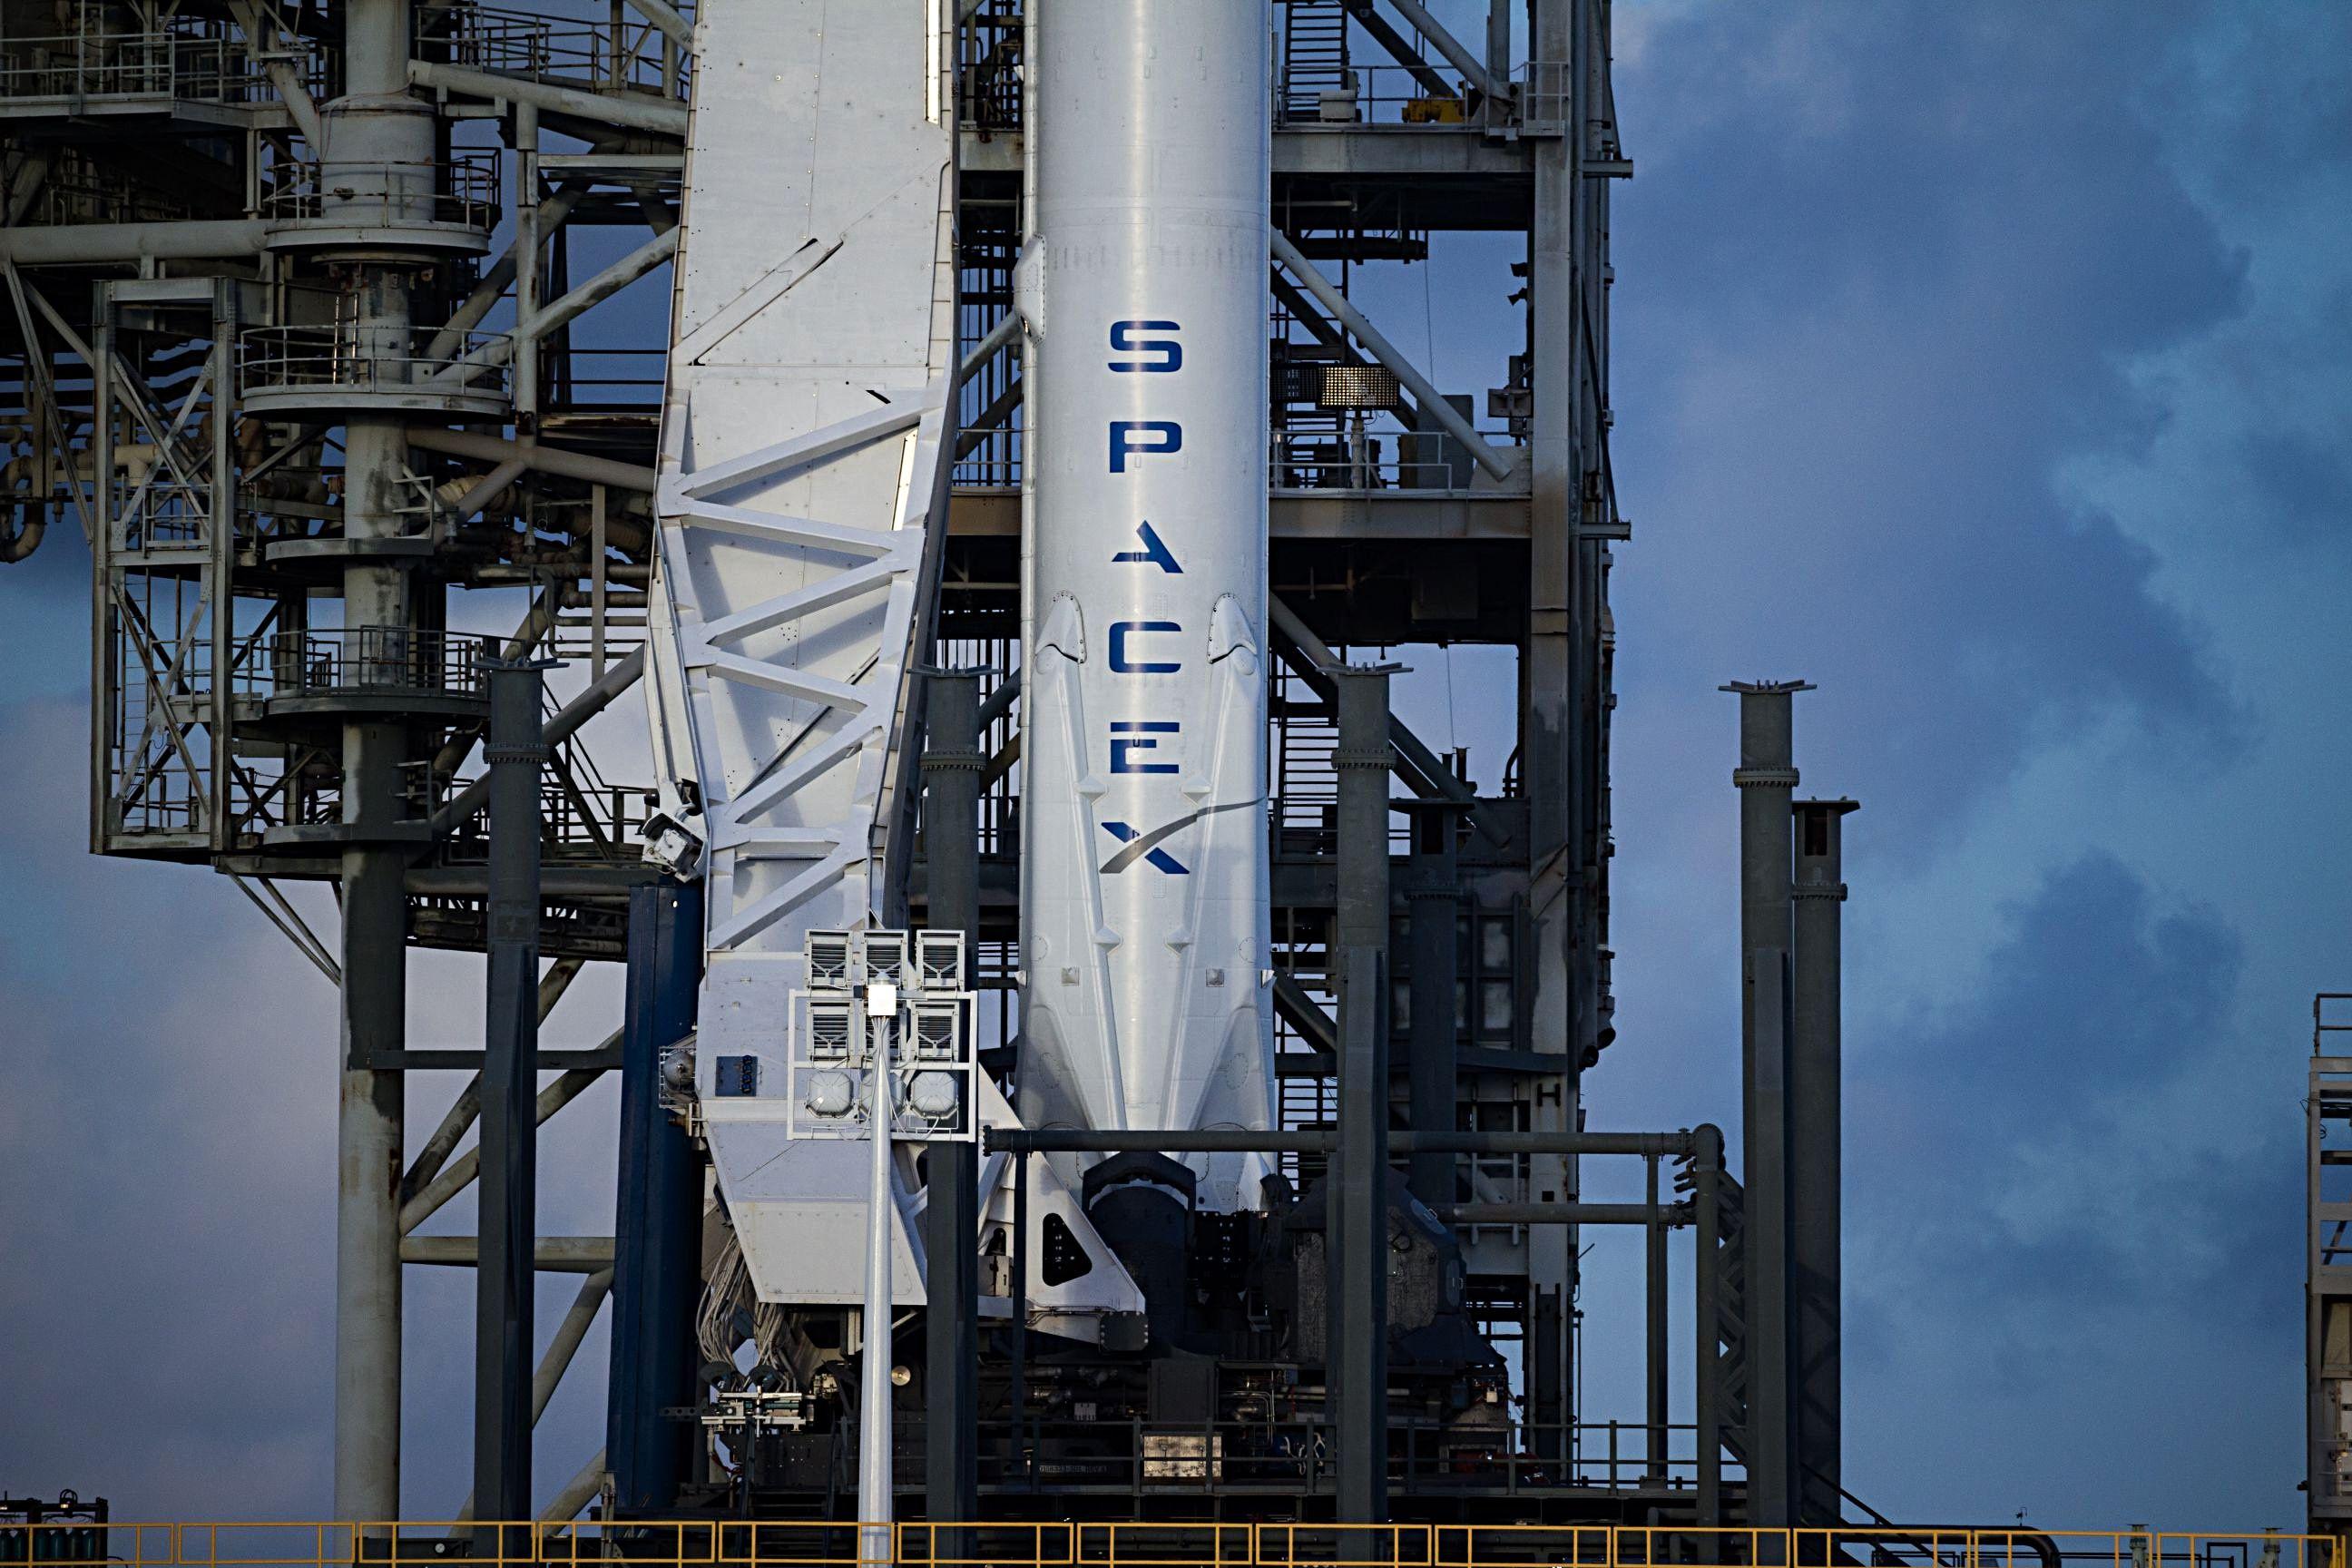 Zuma Falcon 9 Mission Logo - SpaceX prepares for space station supply mission as secret Zuma ...